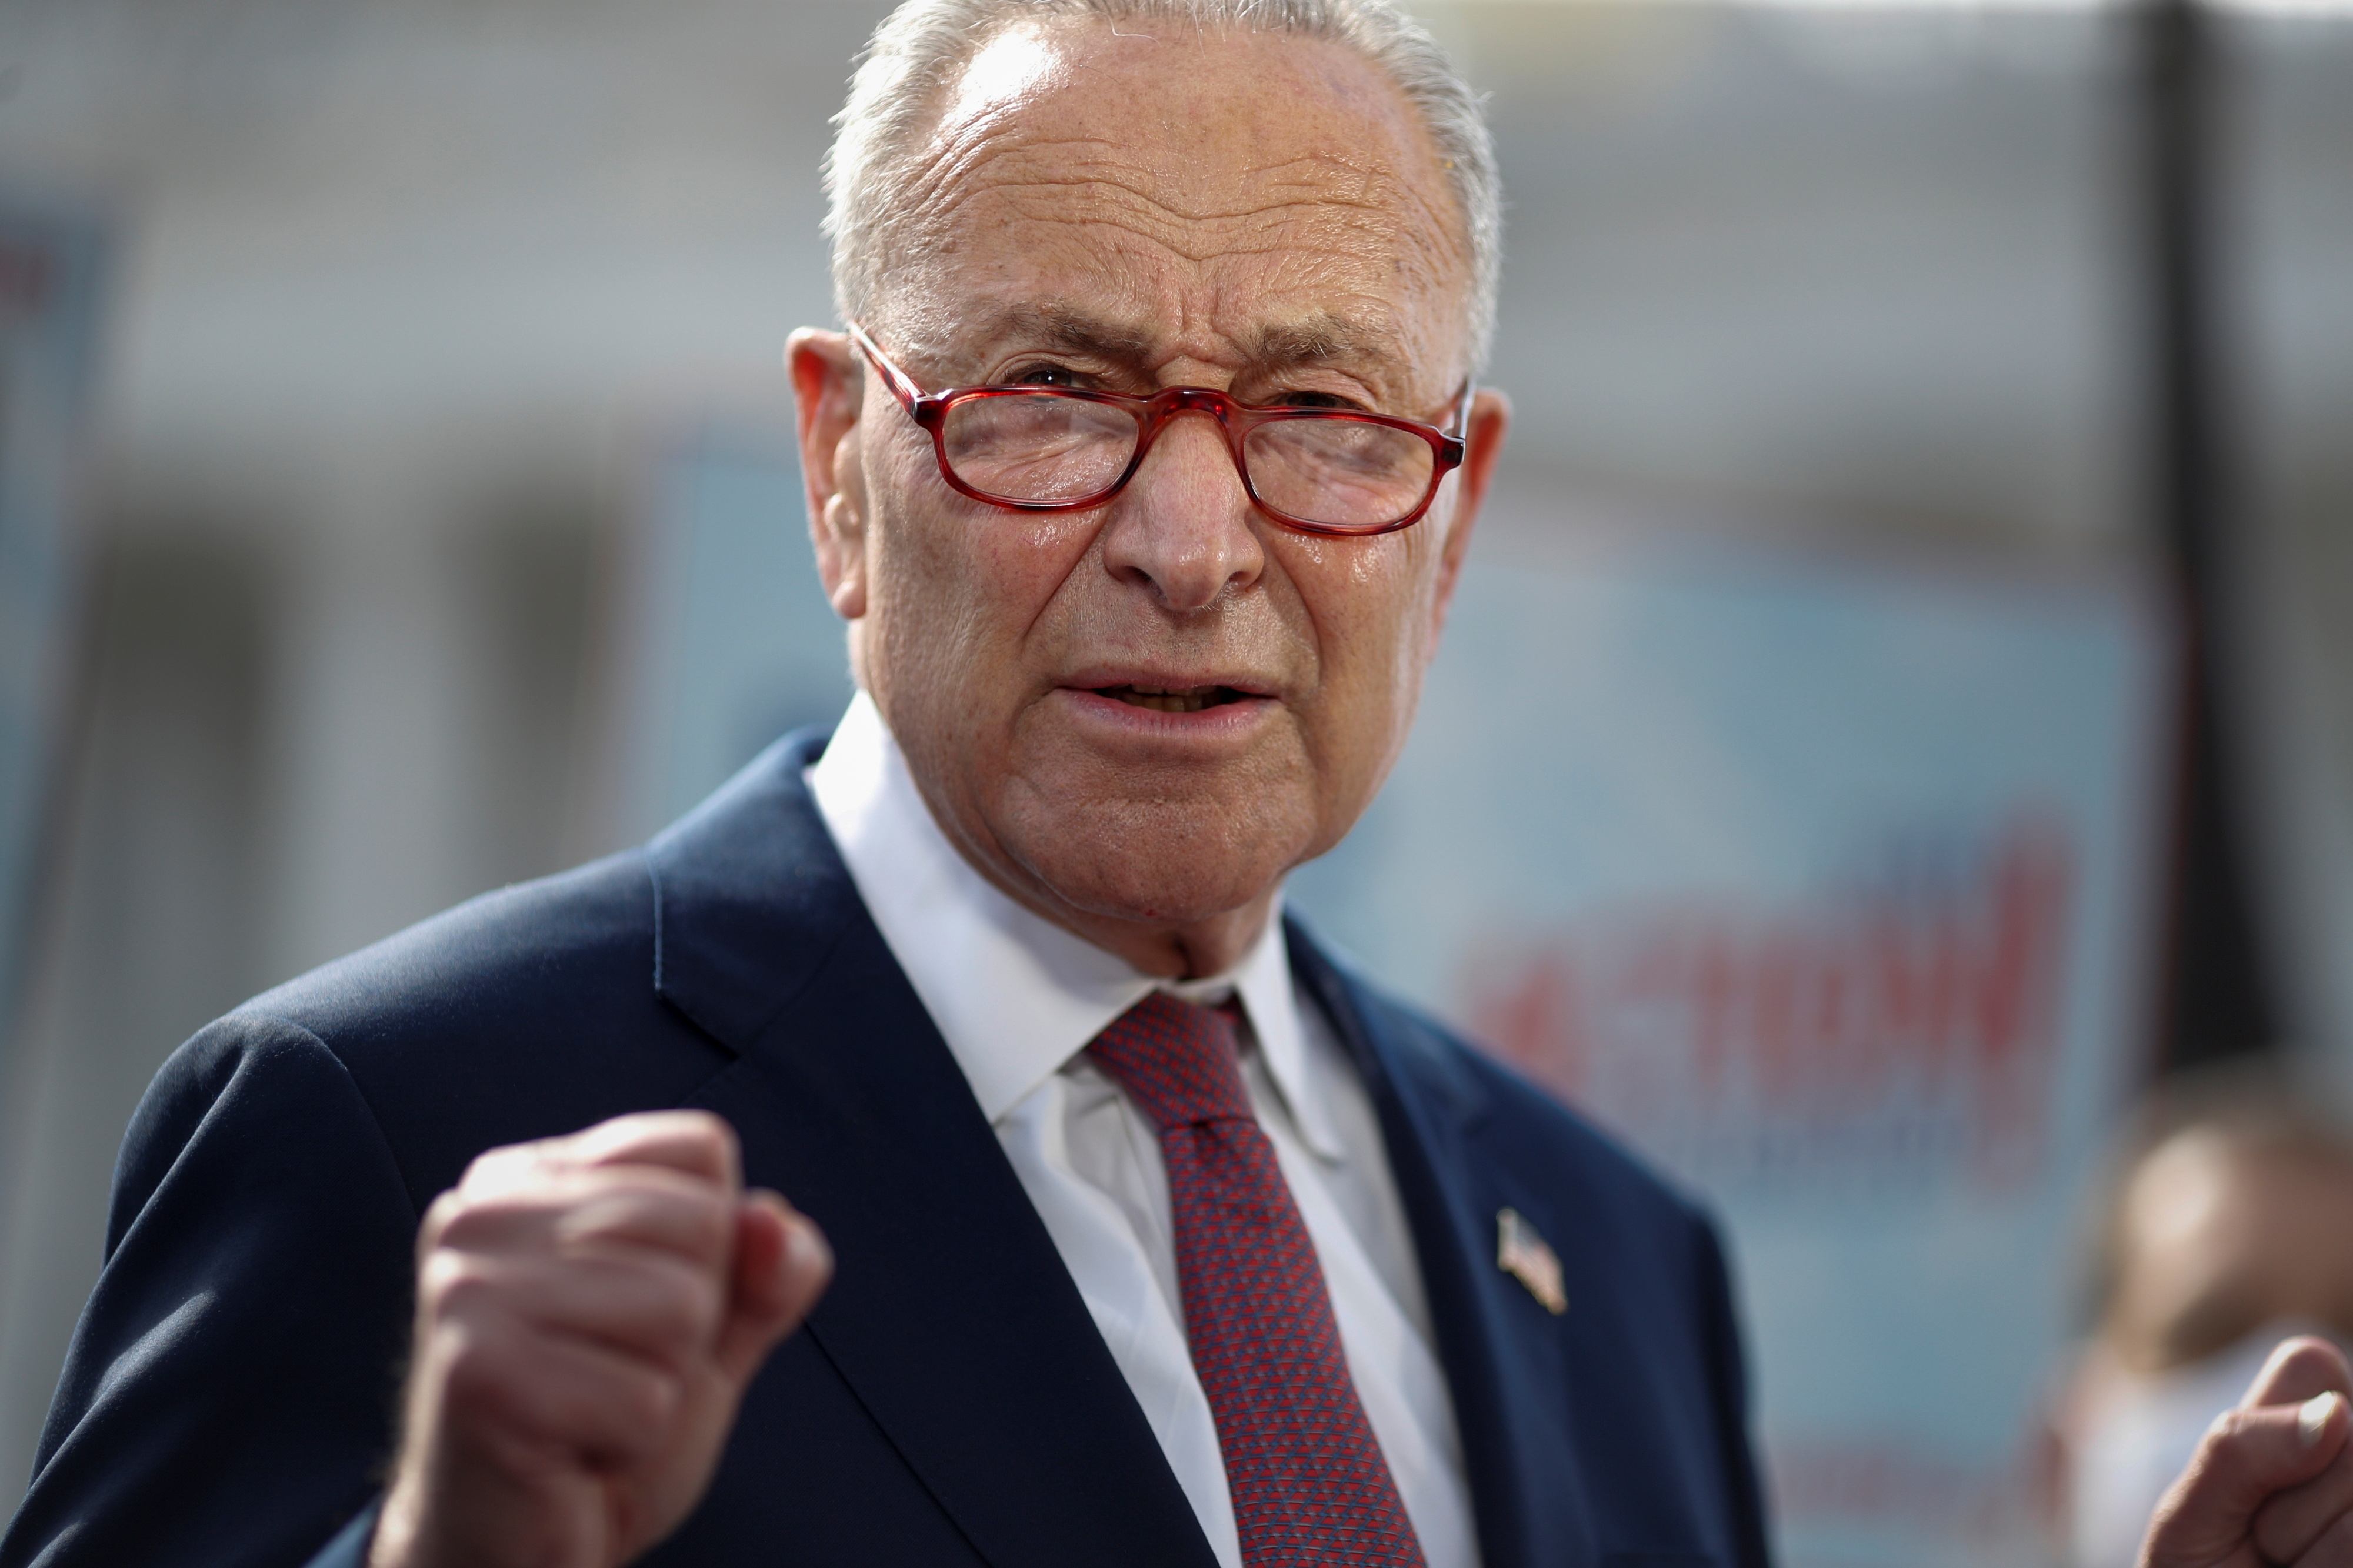 Majority Leader Schumer holds a news conference on hurricane response, on Capitol Hill